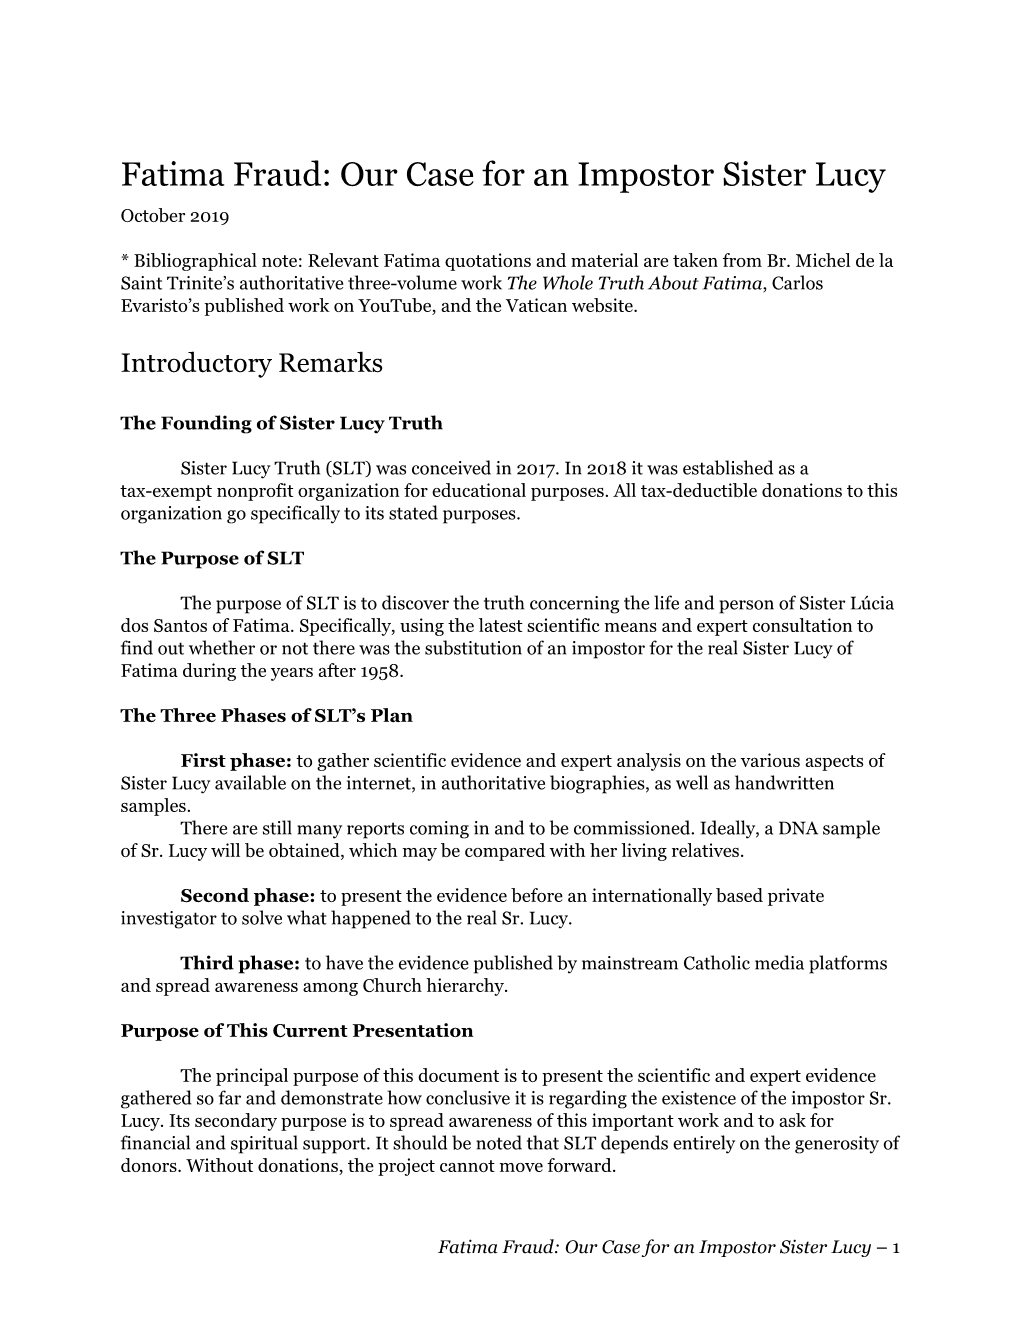 Fatima Fraud: Our Case for an Impostor Sister Lucy October 2019